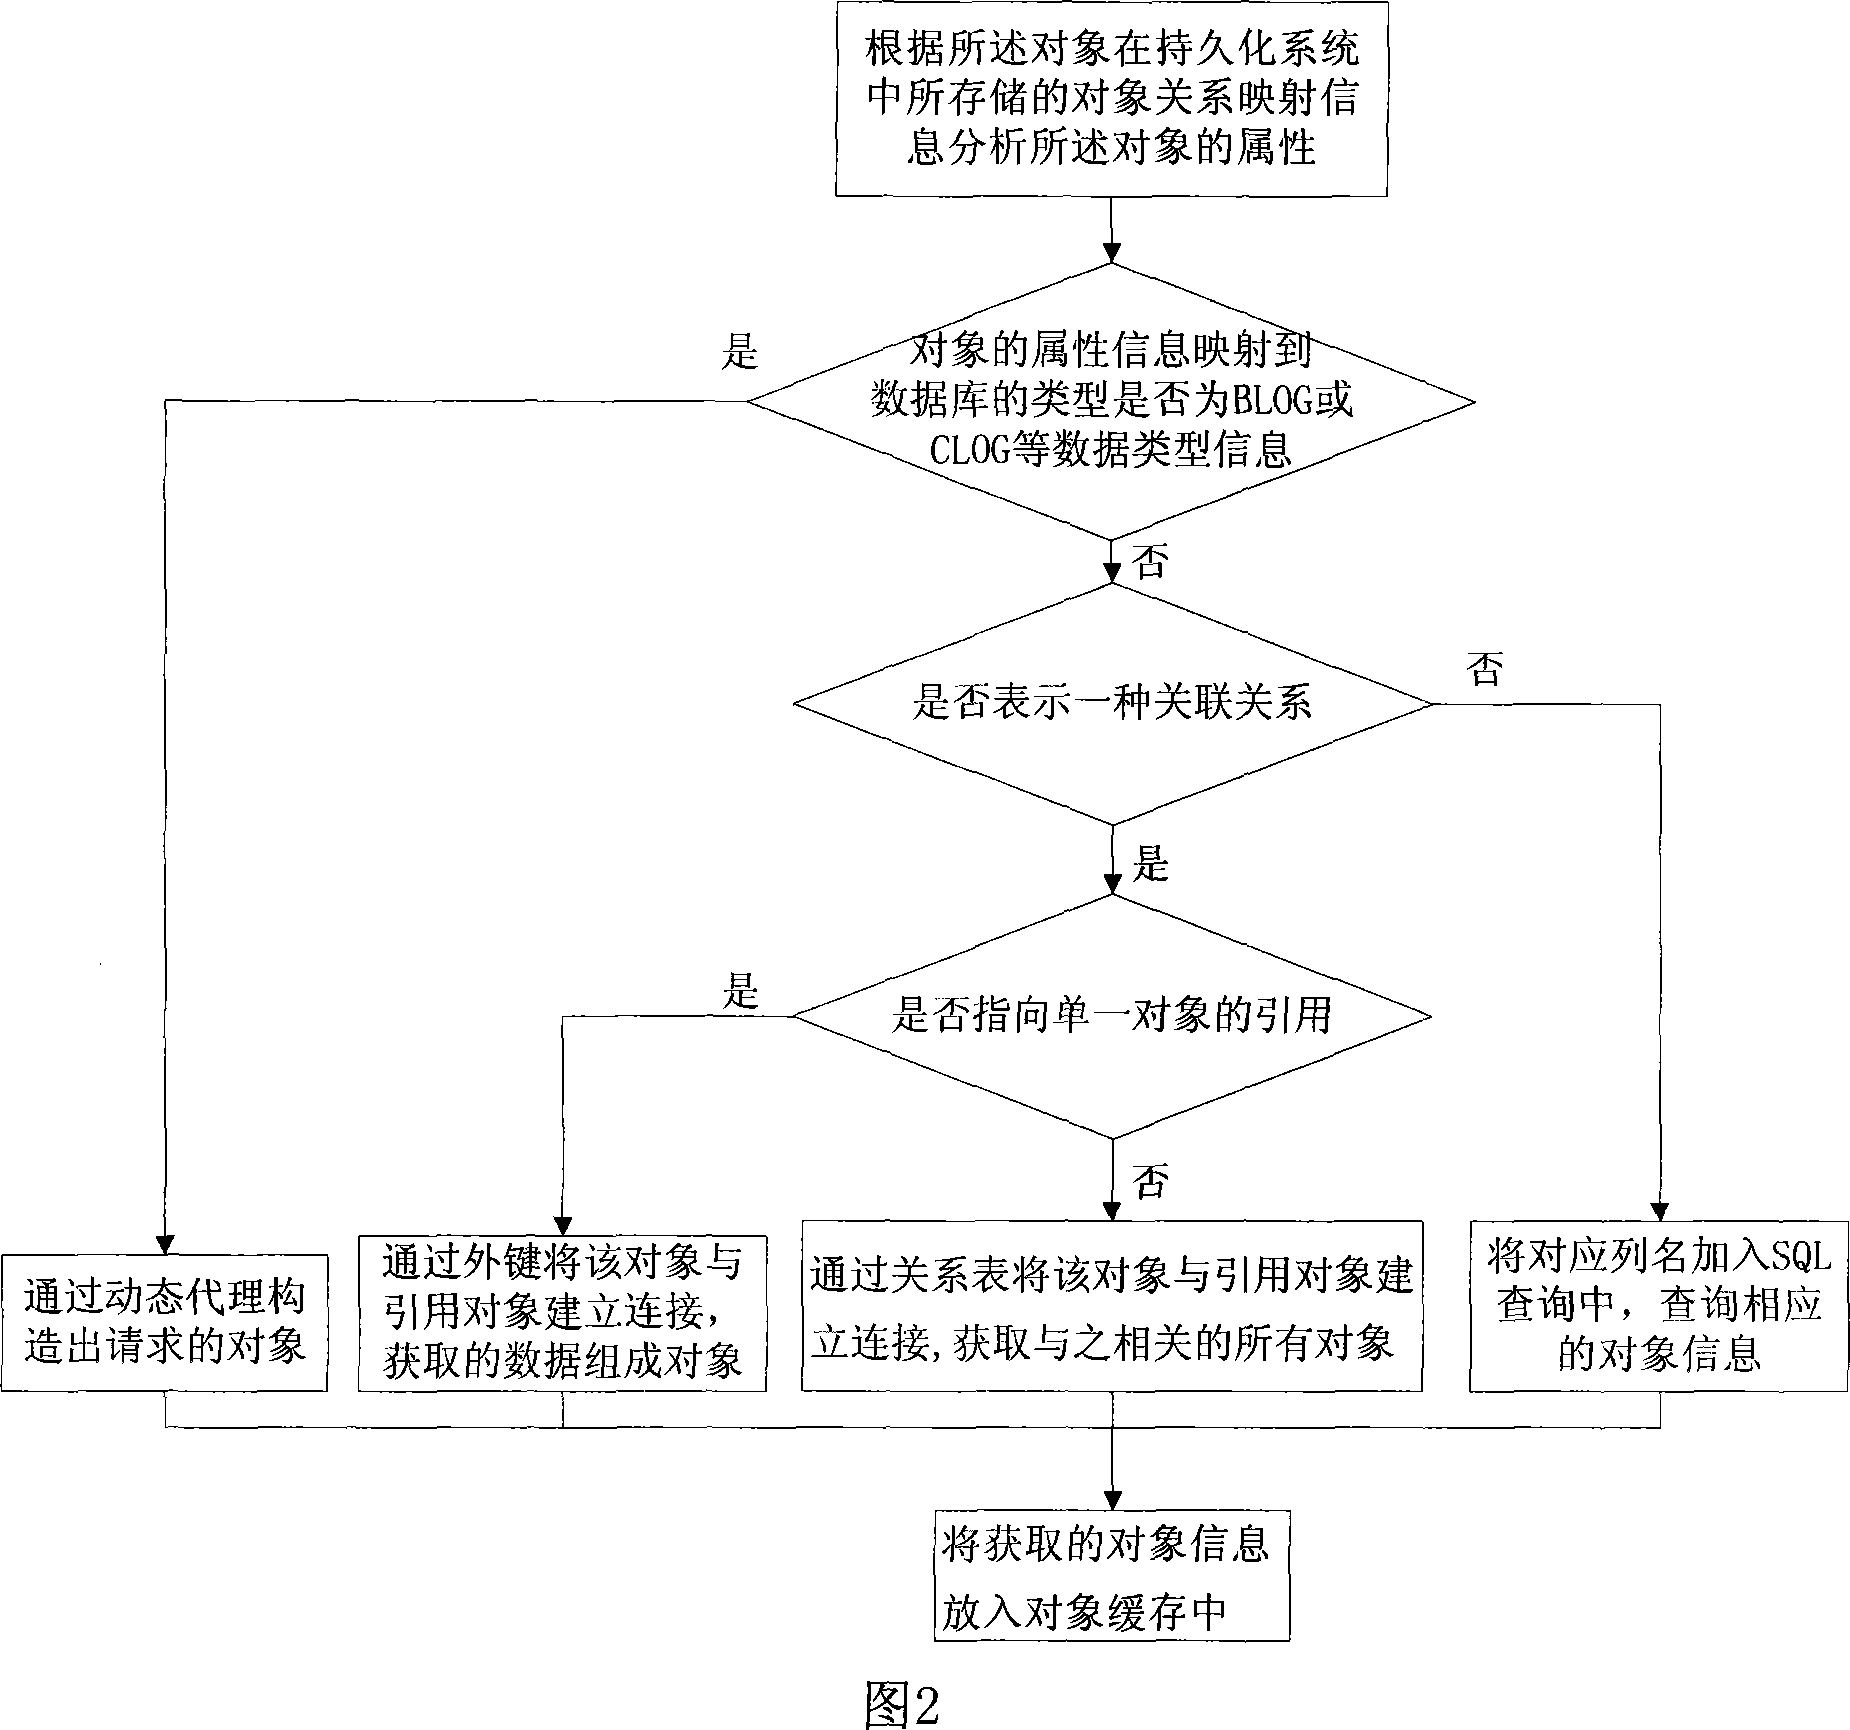 Method for prefetching object